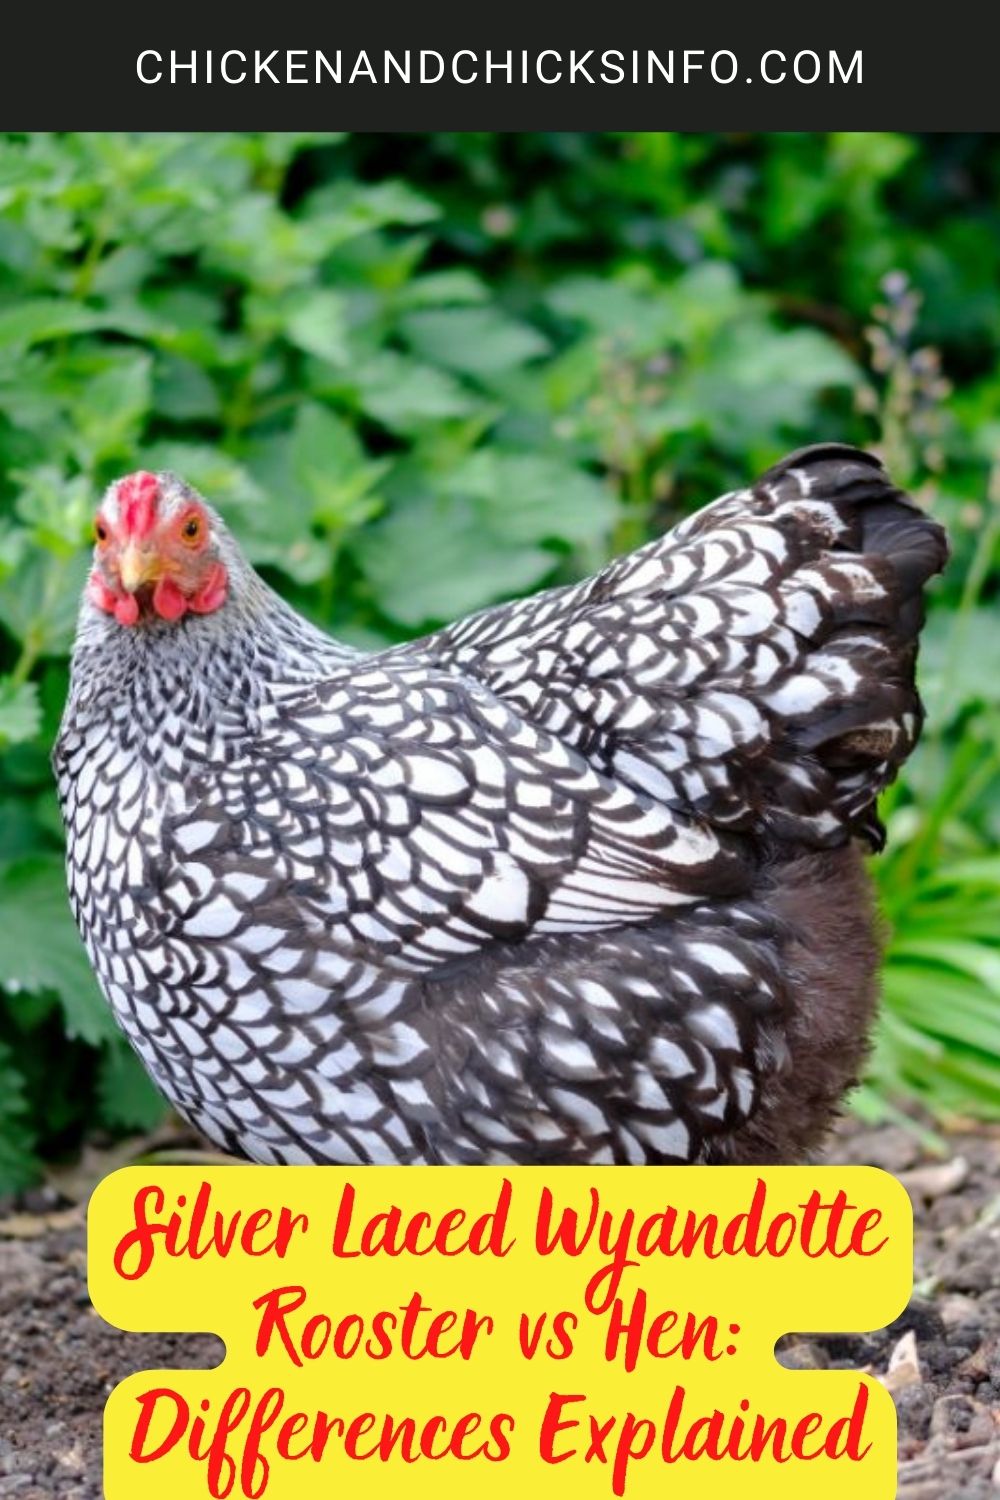 Silver Laced Wyandotte Rooster vs Hen: Differences Explained poster.
